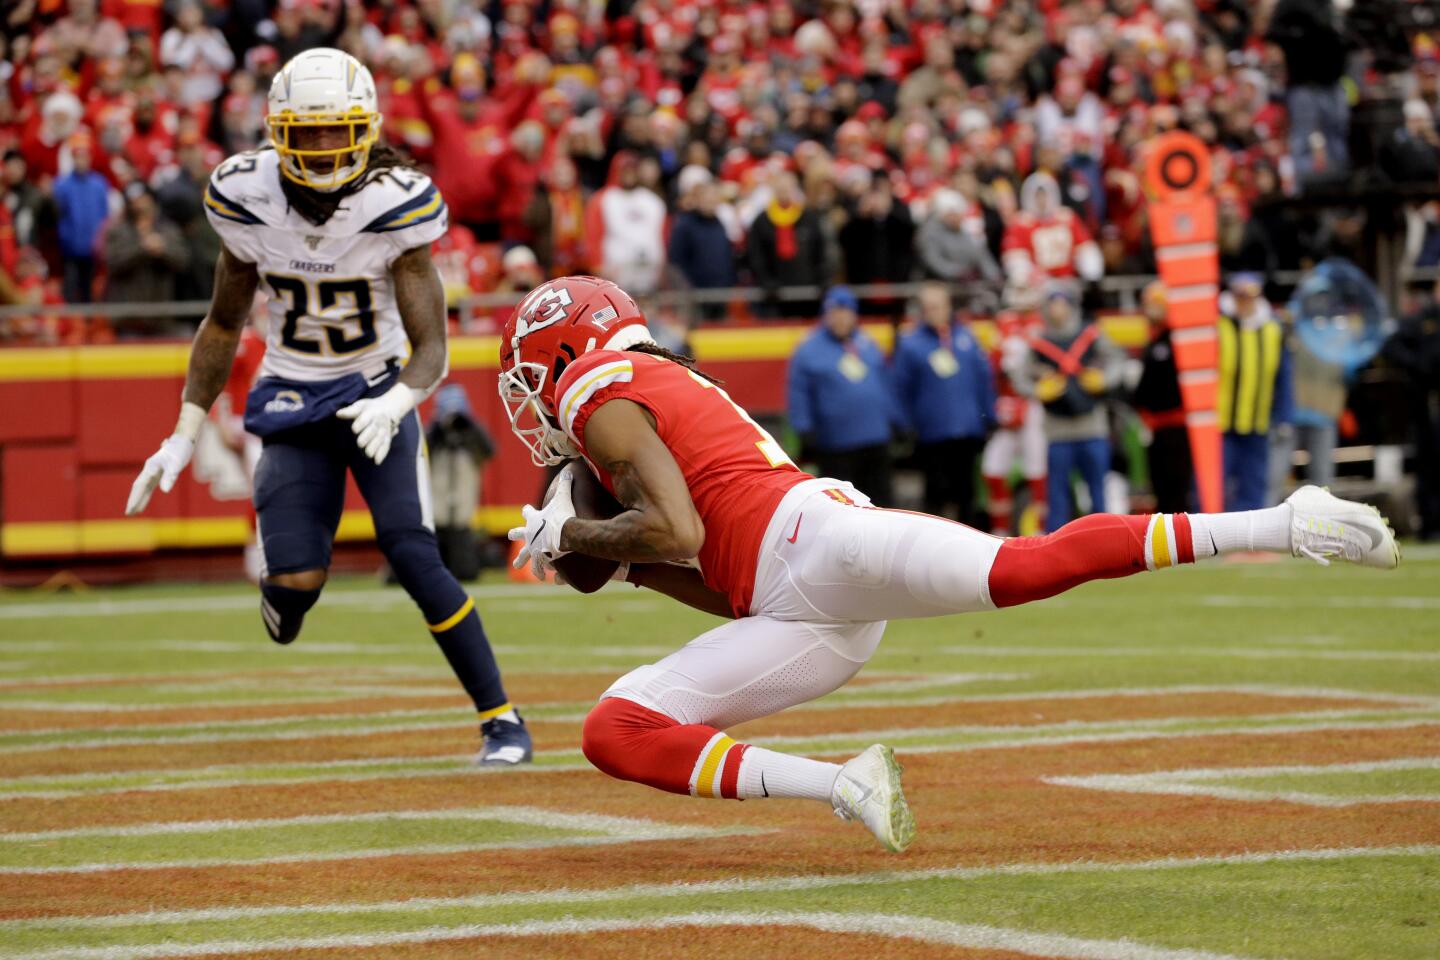 Chiefs receiver Demarcus Robinson (11) makes a touchdown catch in front of Chargers safety Rayshawn Jenkins (23) during a game Dec. 29.